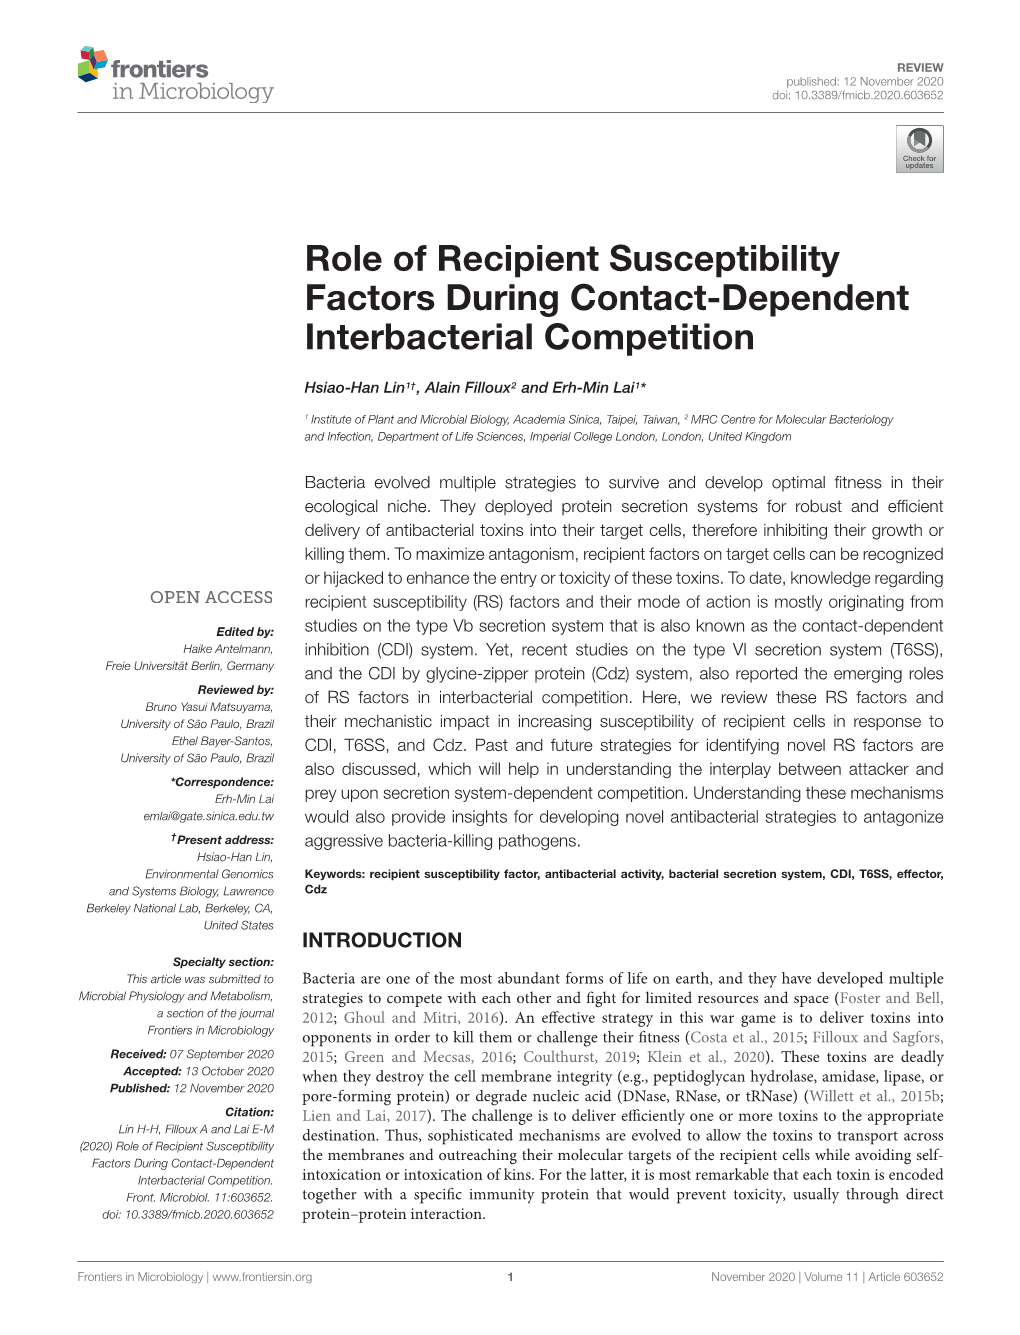 Role of Recipient Susceptibility Factors During Contact-Dependent Interbacterial Competition